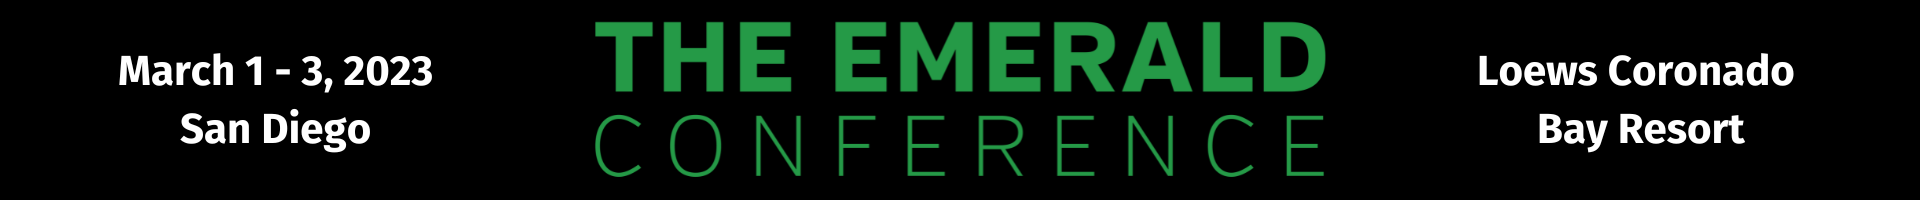 Emerald Conference 2023 Event Banner